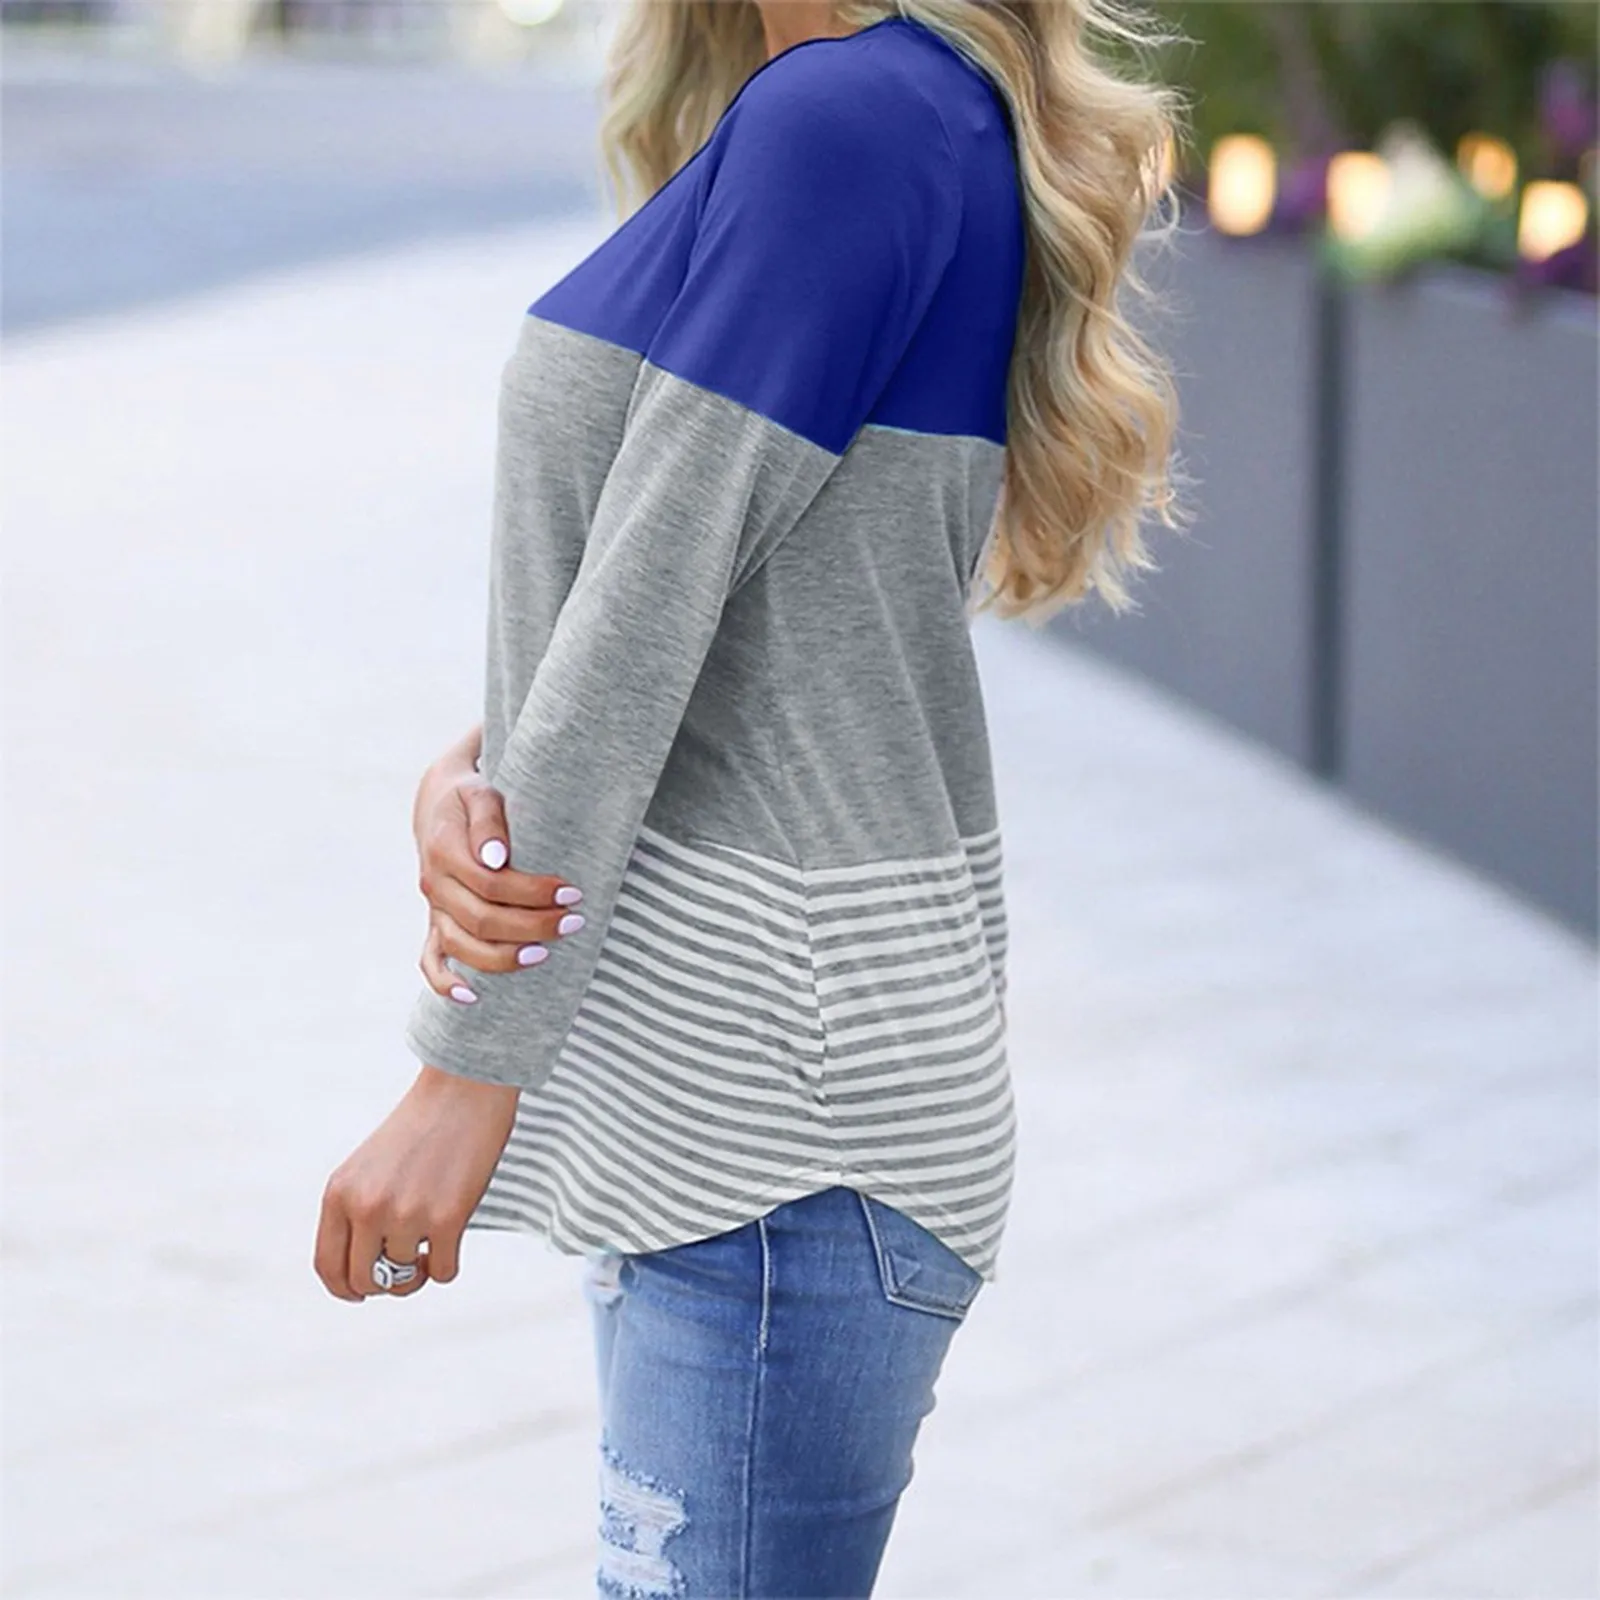 Womens Maternity Tshirt Tops Summer O Neck Long Sleeve Striped Print Patchwork Nursing Tops T-shirt For Breastfeeding Blusa used maternity clothes near me